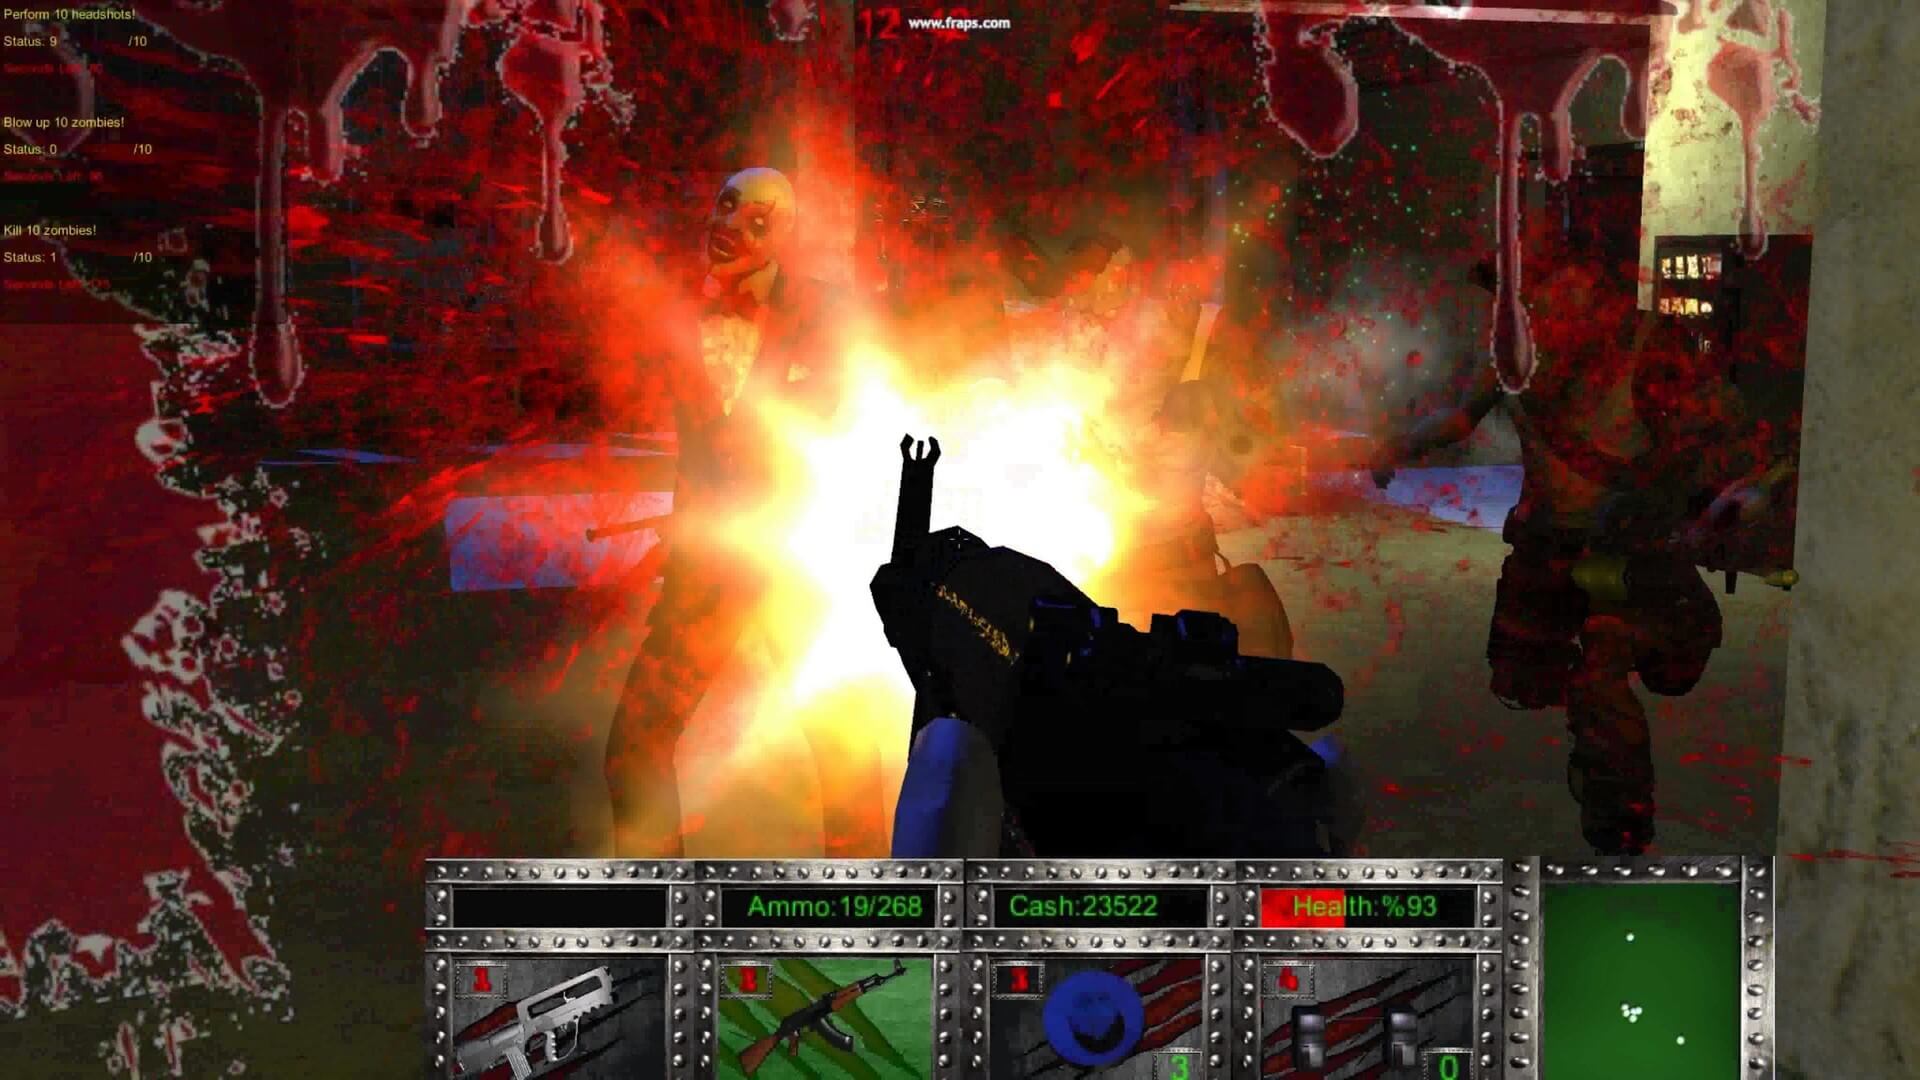 The player firing a gun at zombies in the Digital Homicide game The Slaughtering Grounds